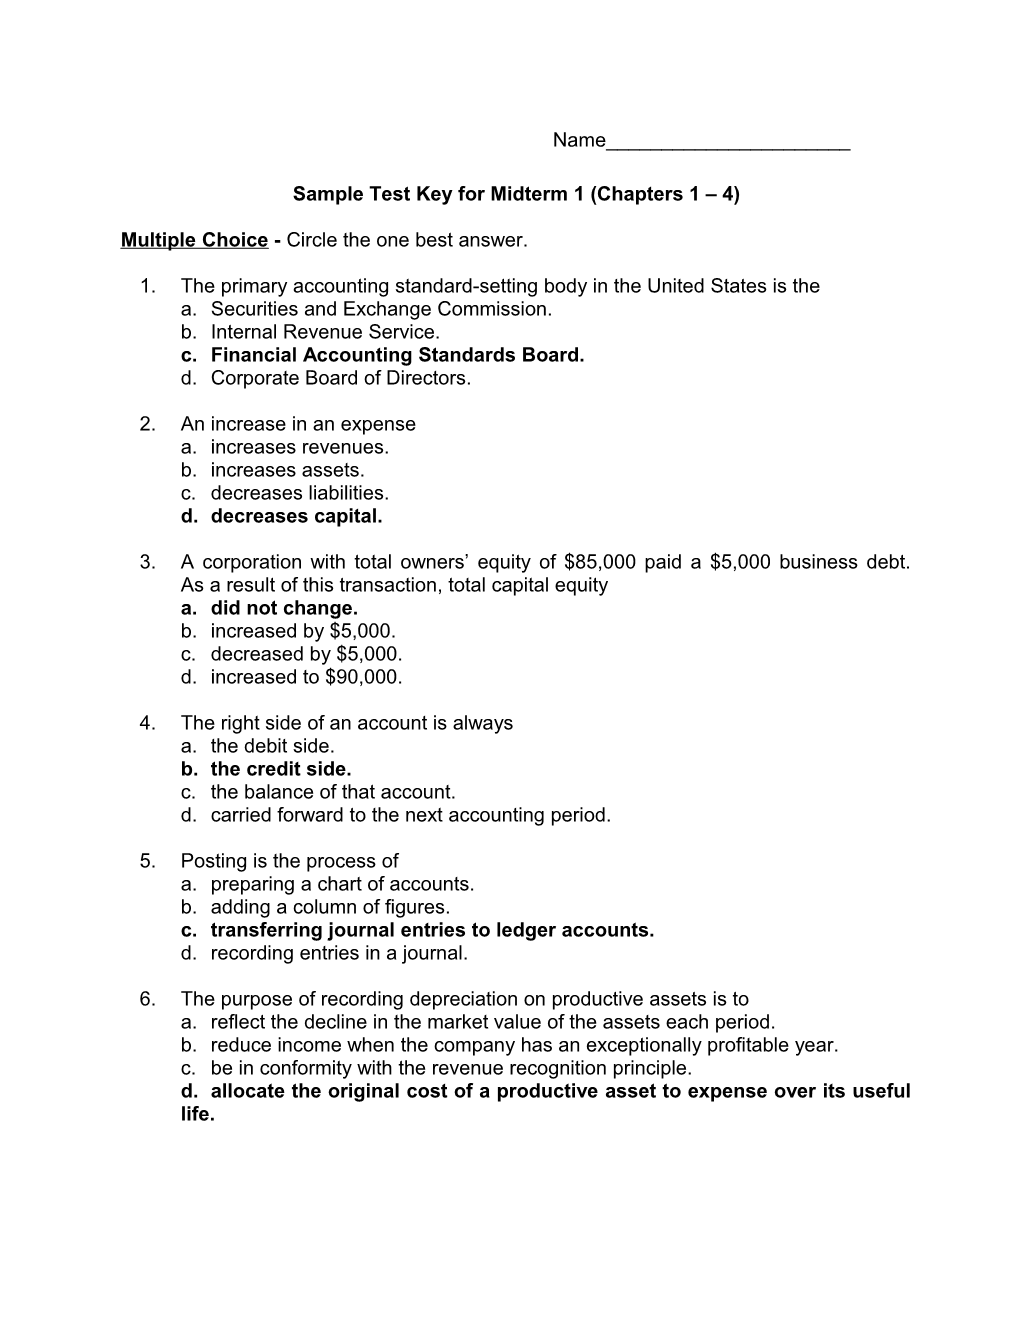 Sample Test Key for Midterm 1 (Chapters 1 4)